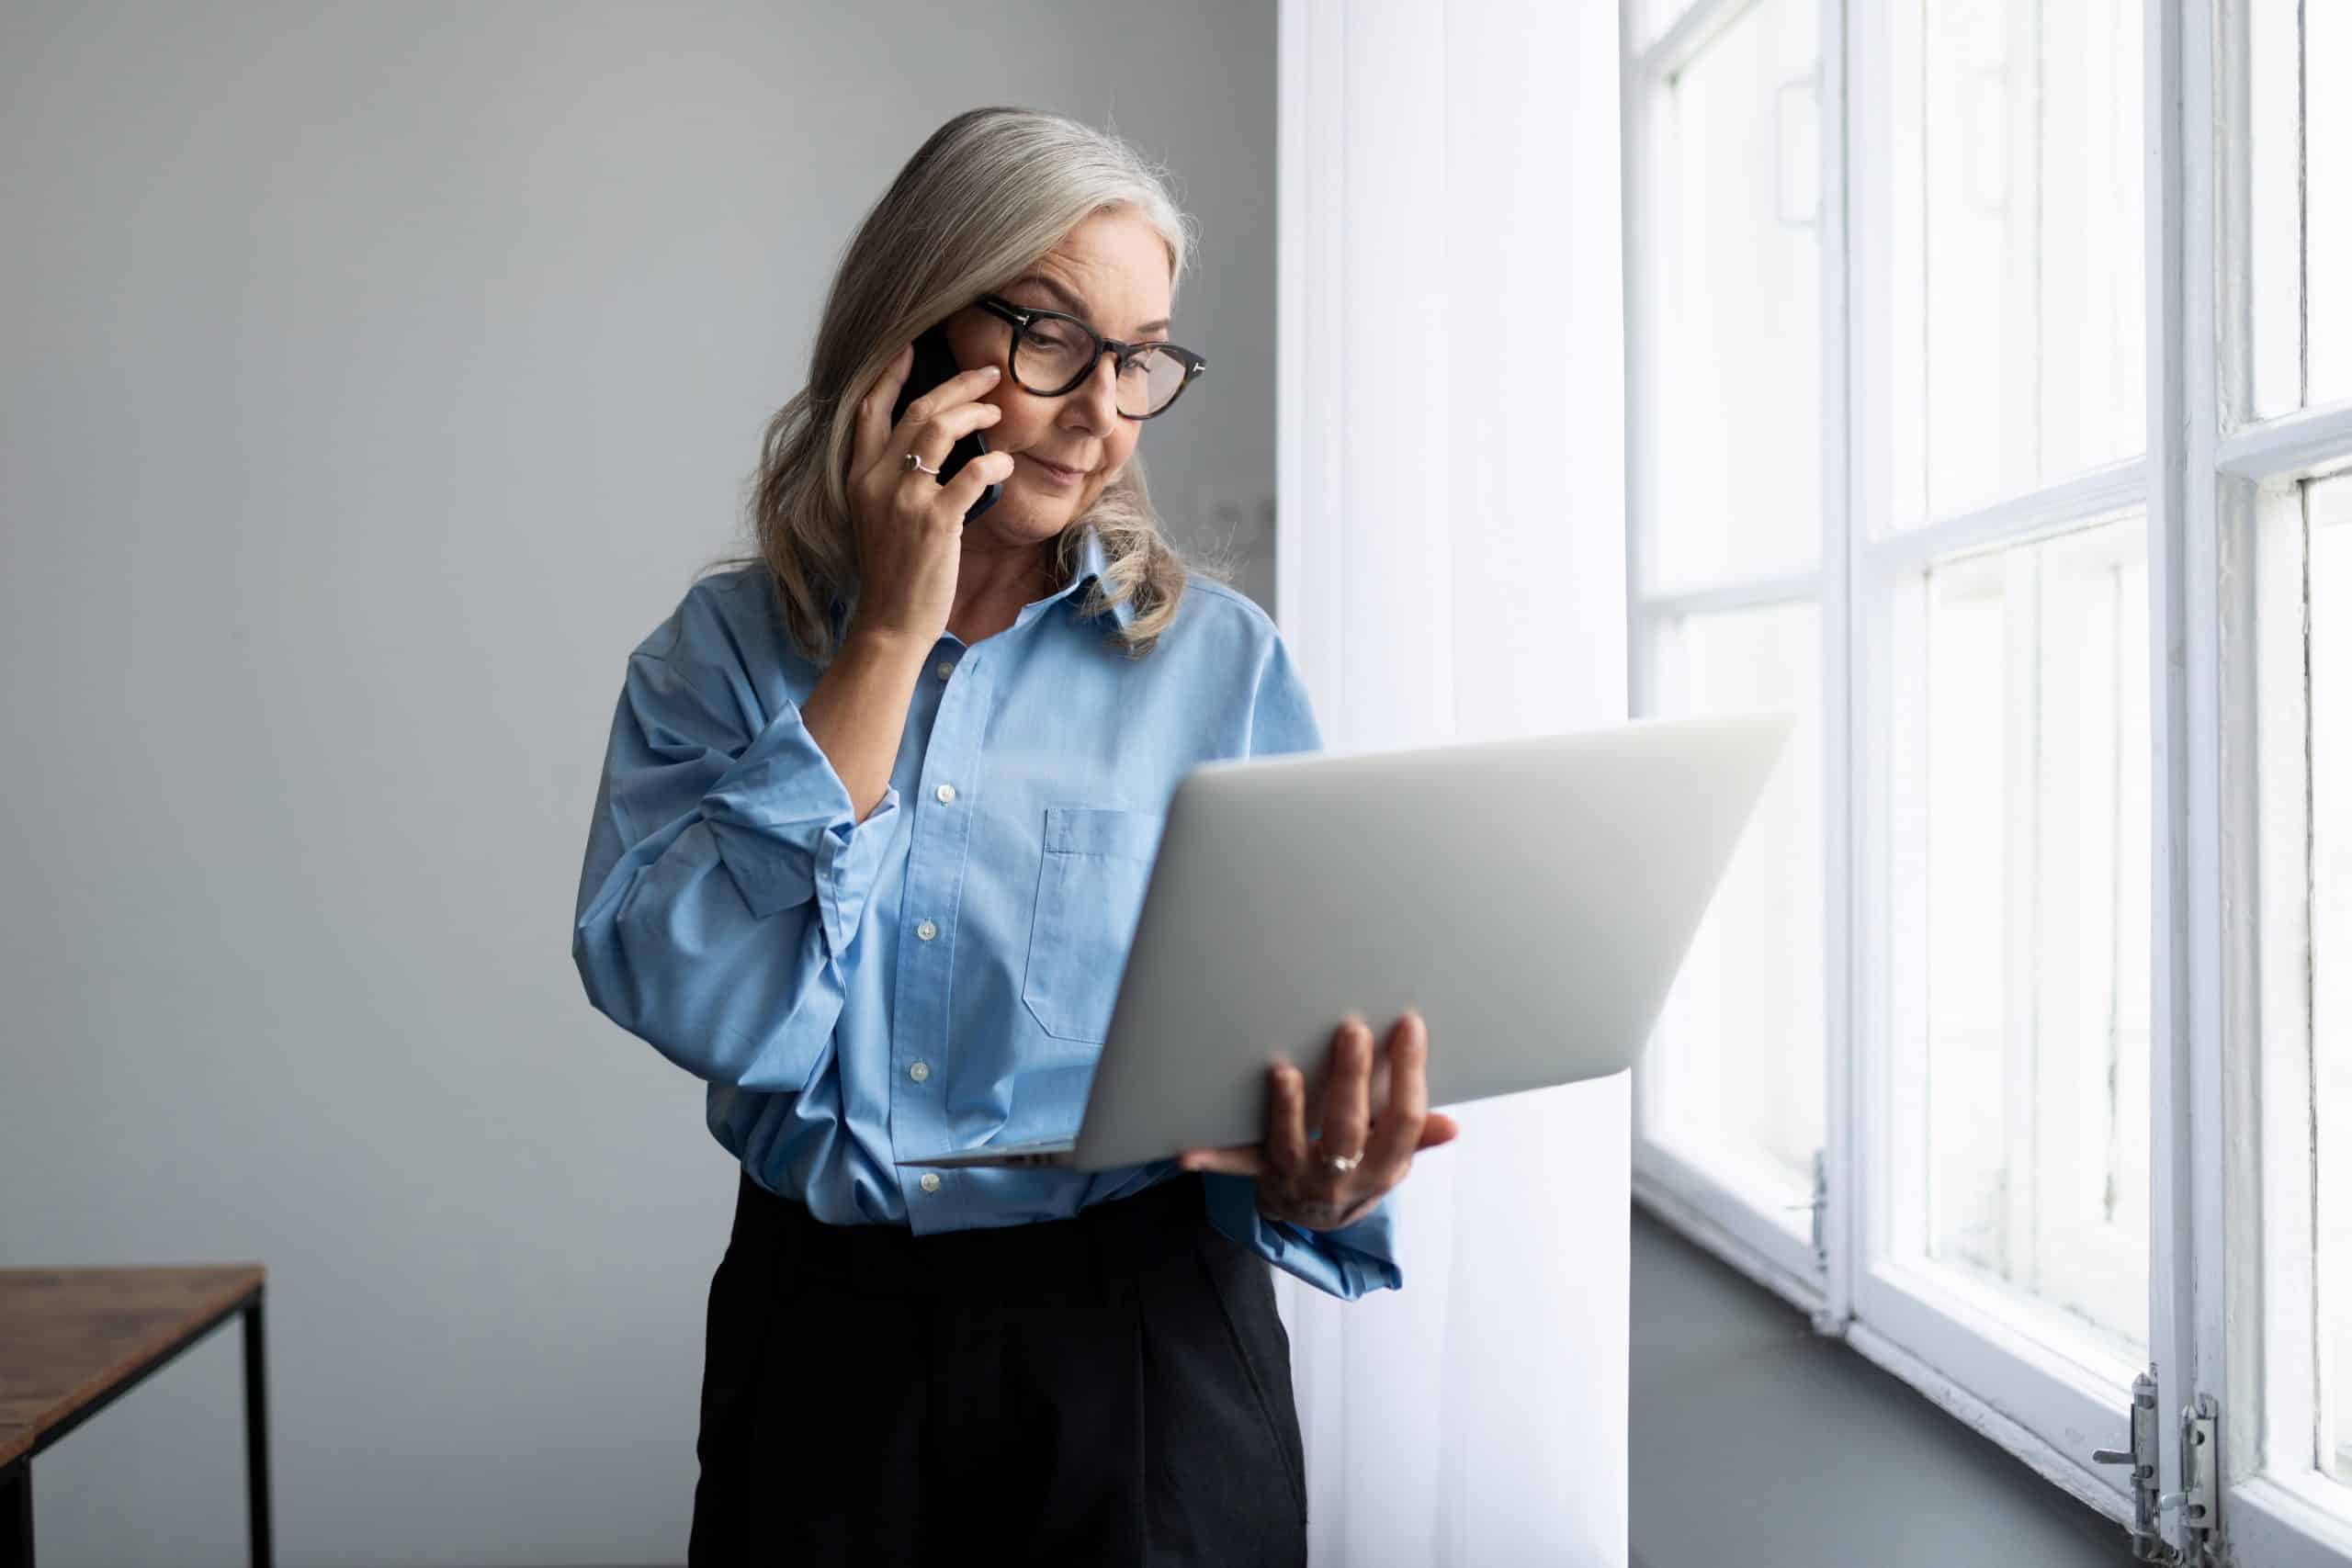 adult fifty-year-old female business consultant speaks on a mobile phone with a laptop in her hands